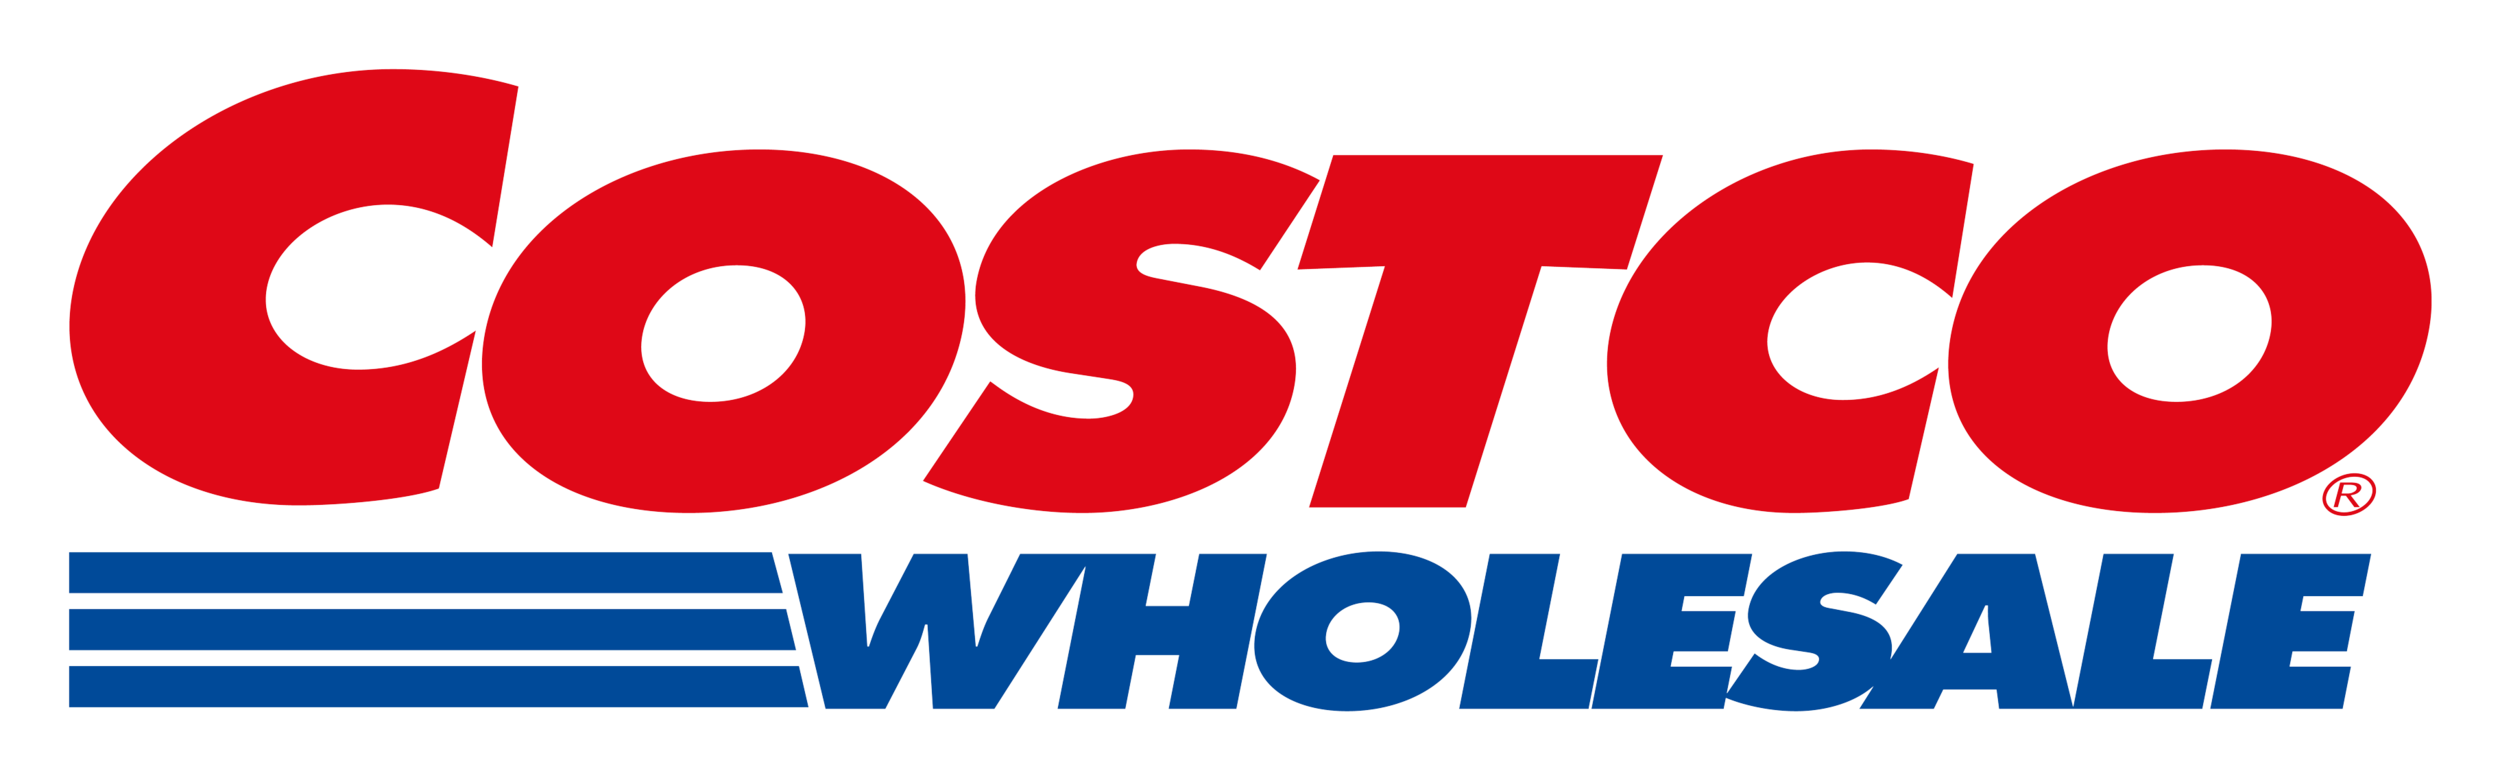 empowering-marginalized-youth-in-the-outdoors-costco-png-logo-6.png